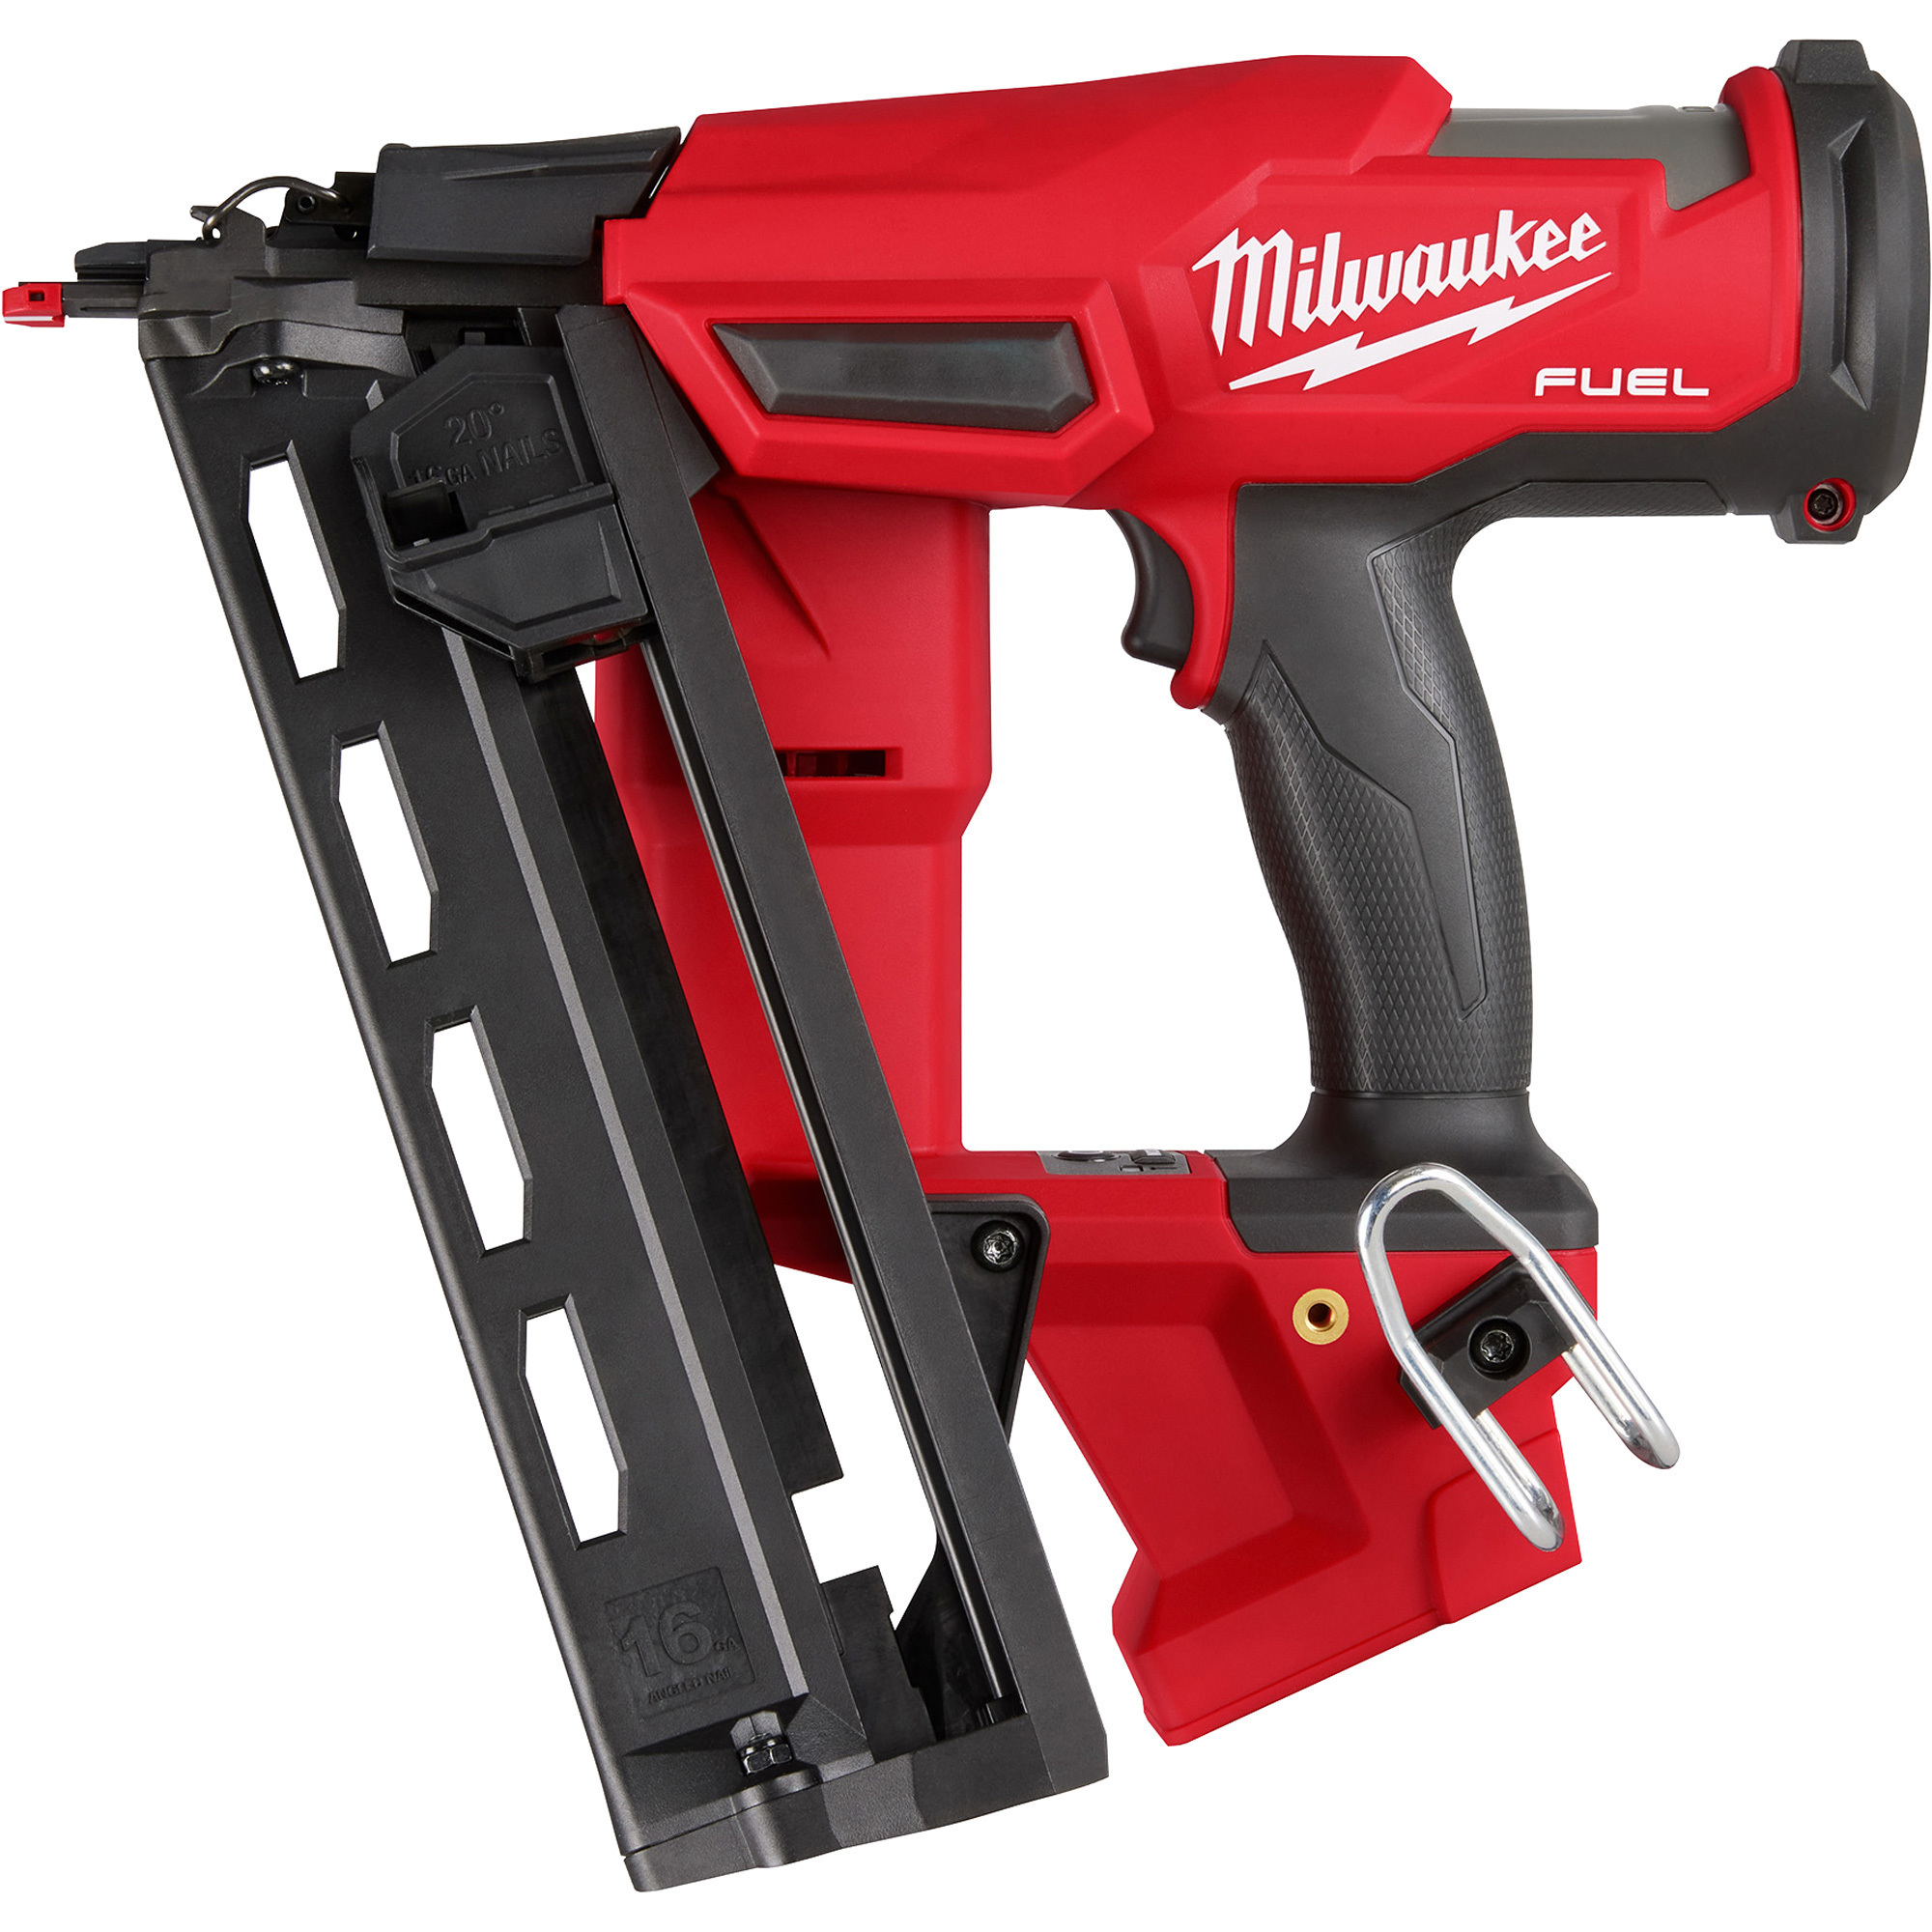 Milwaukee M18 FUEL 16-Gauge Angled Finish Nailer, Tool Only, Model 2841-20